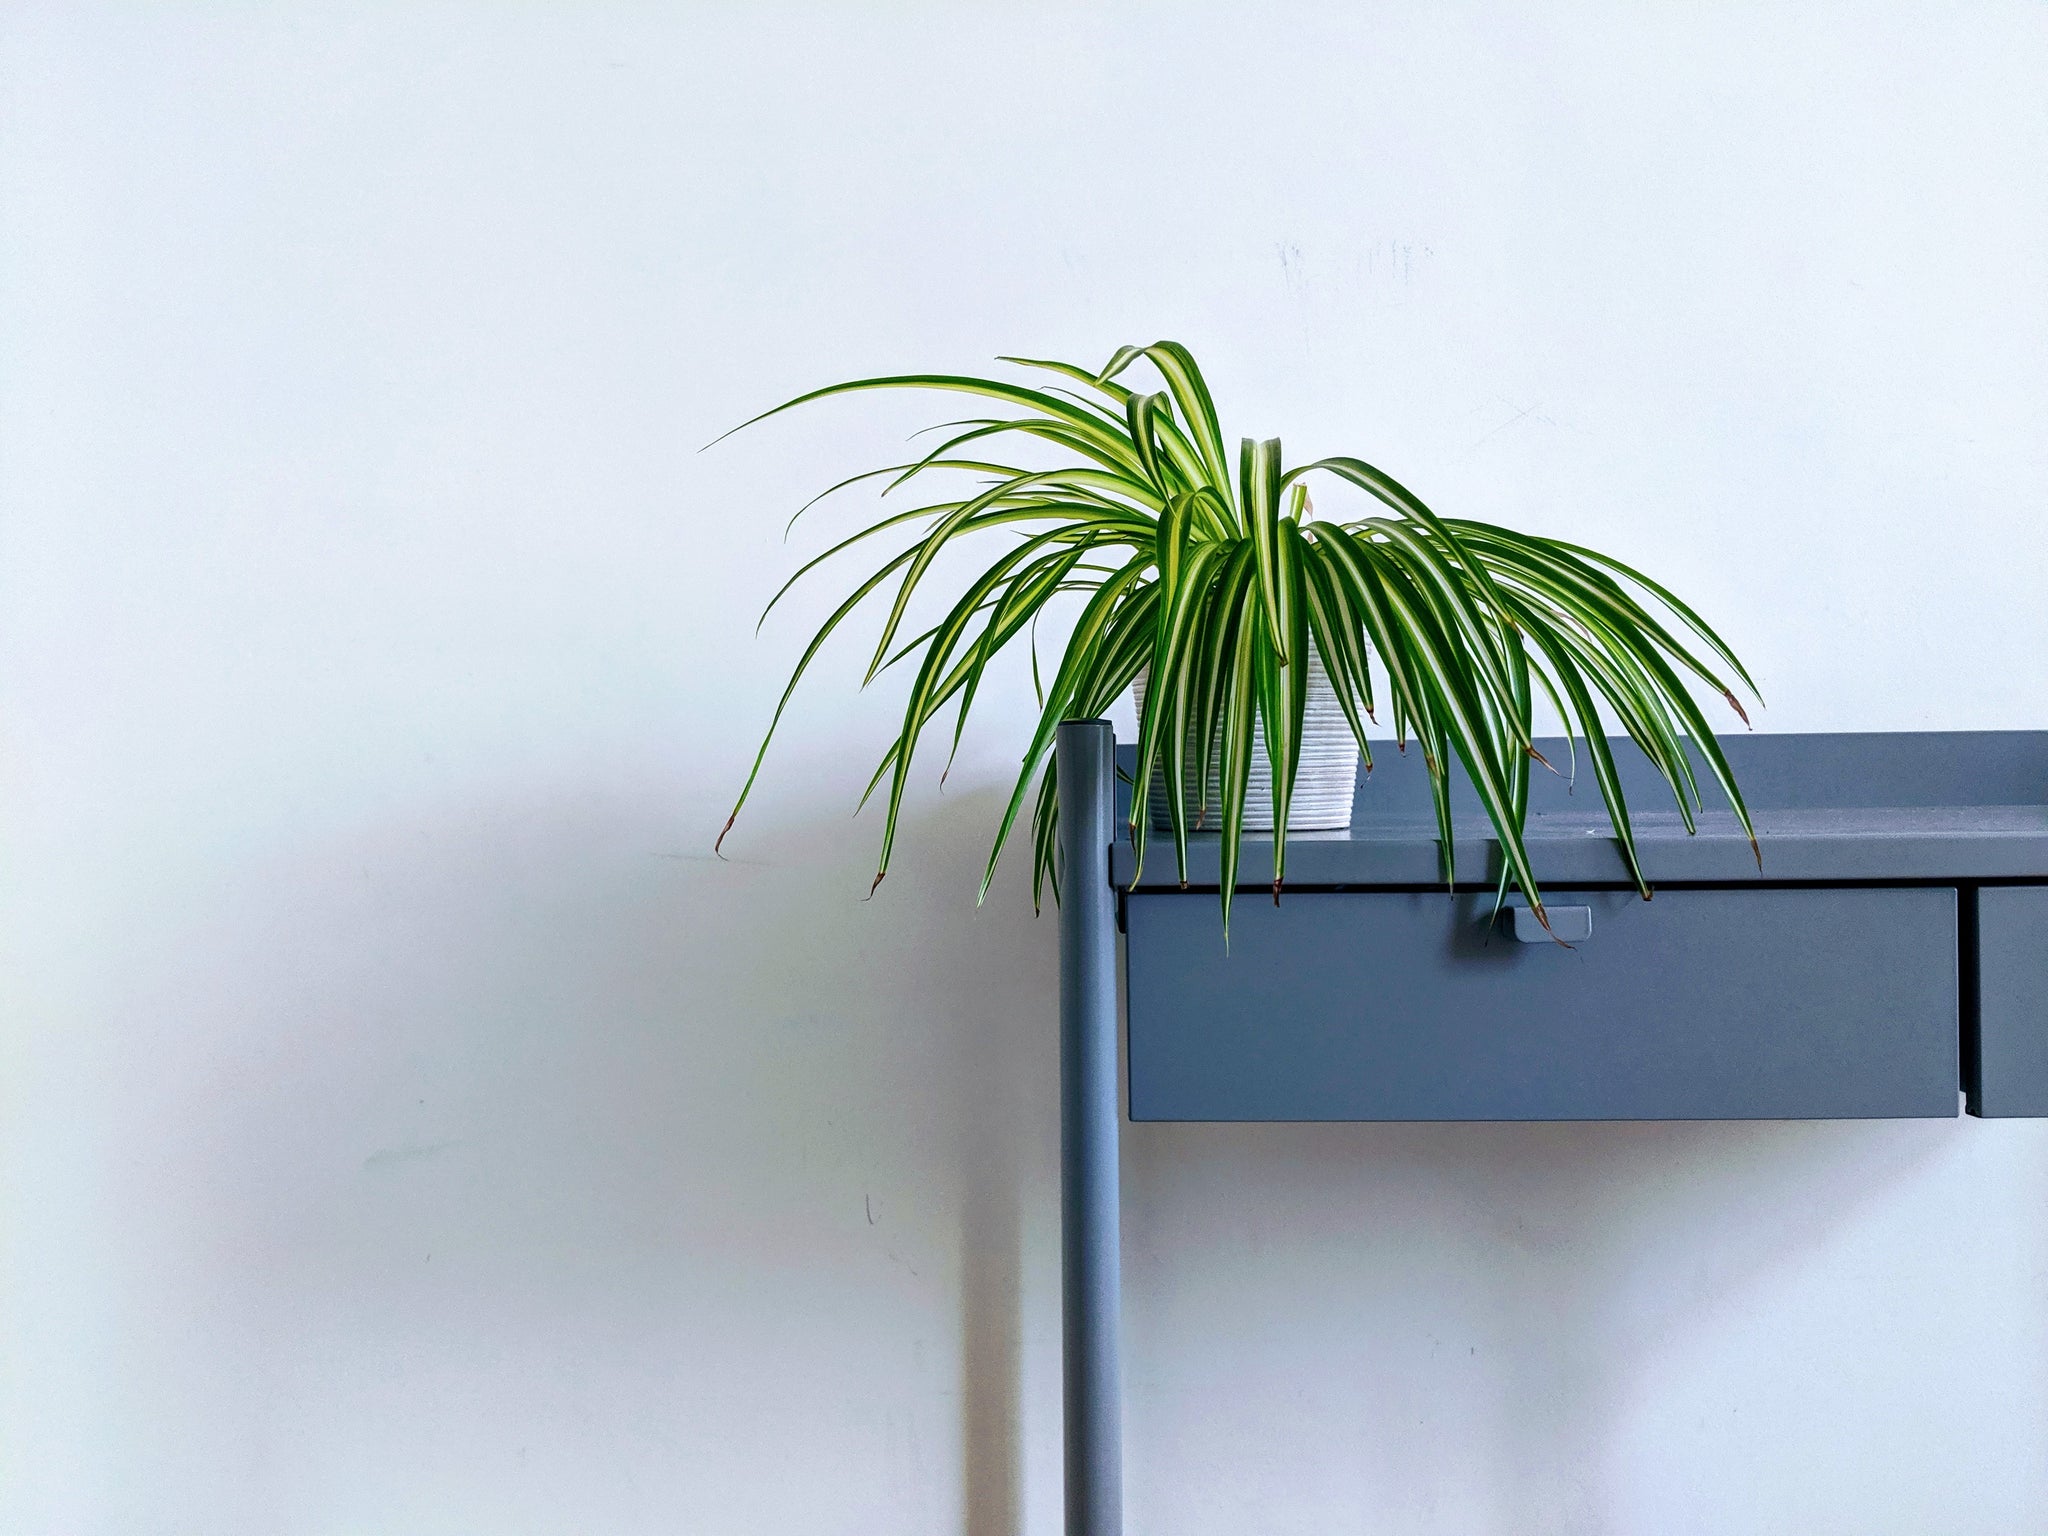 Image shows a spider plant on a table